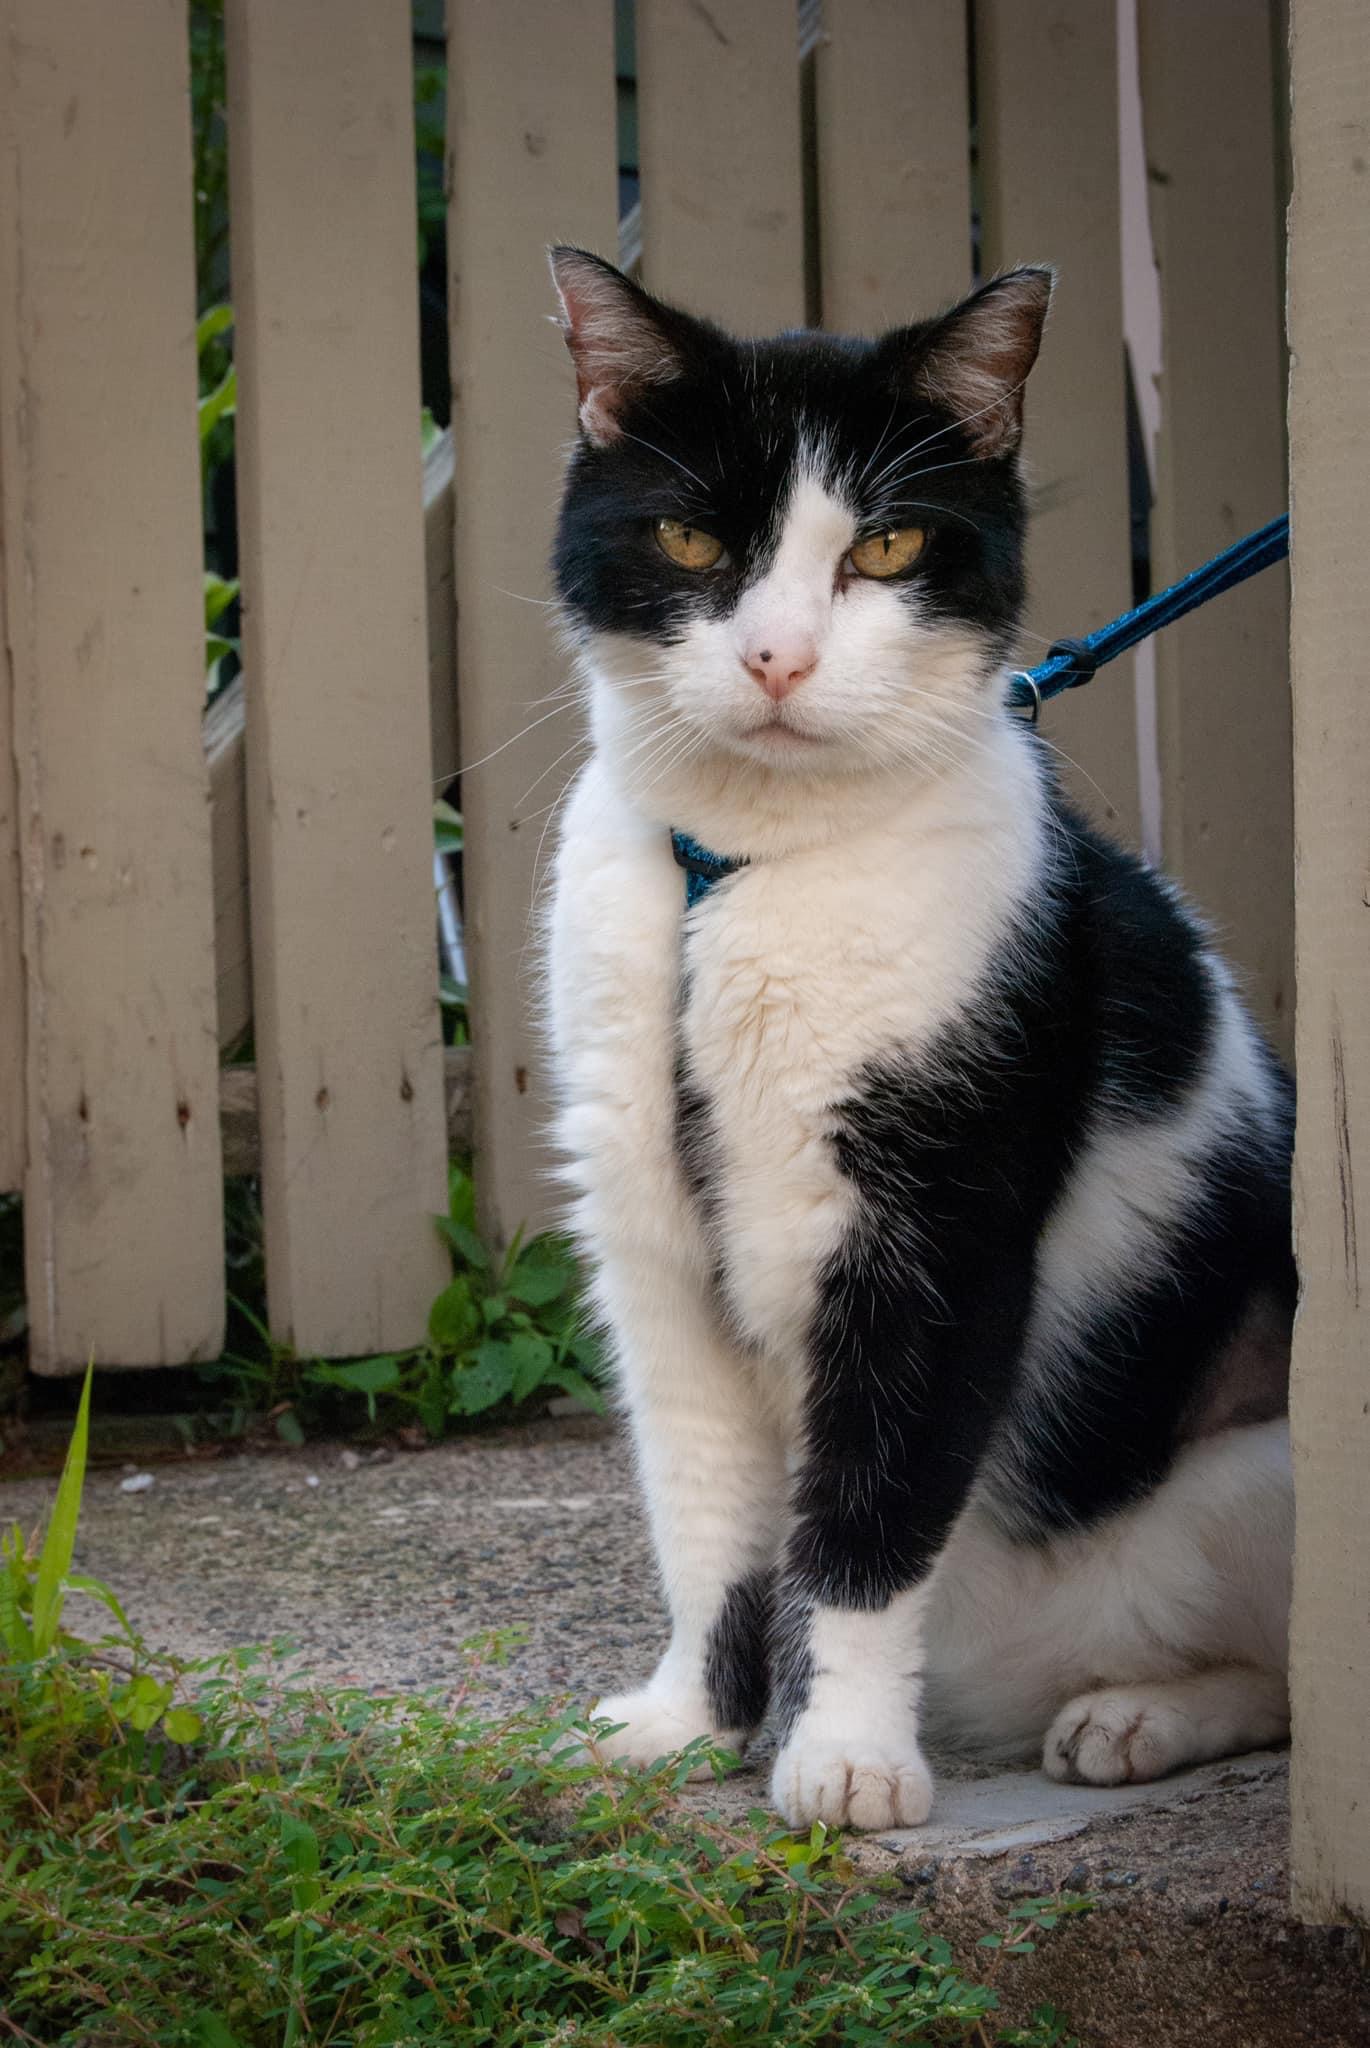  black and white cat with a black dot on her nose and orange eyes, in a blue harness, is seated, looking out, from an open gateway